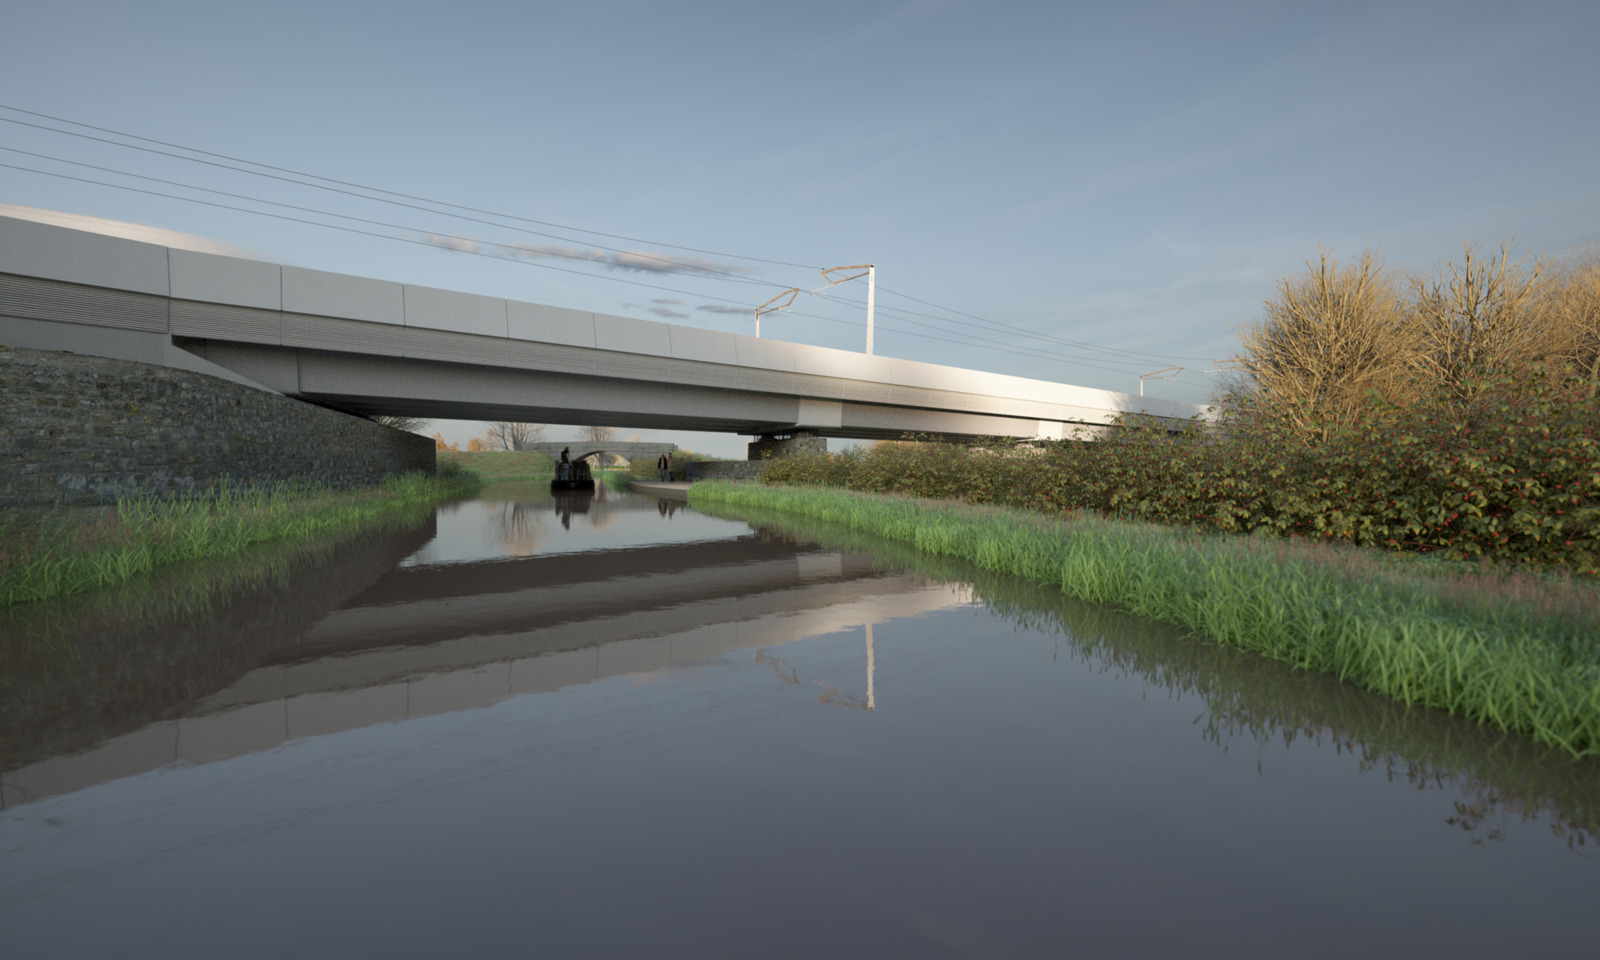 A CGI artist's impression of the HS2 Oxford Canal Viaduct